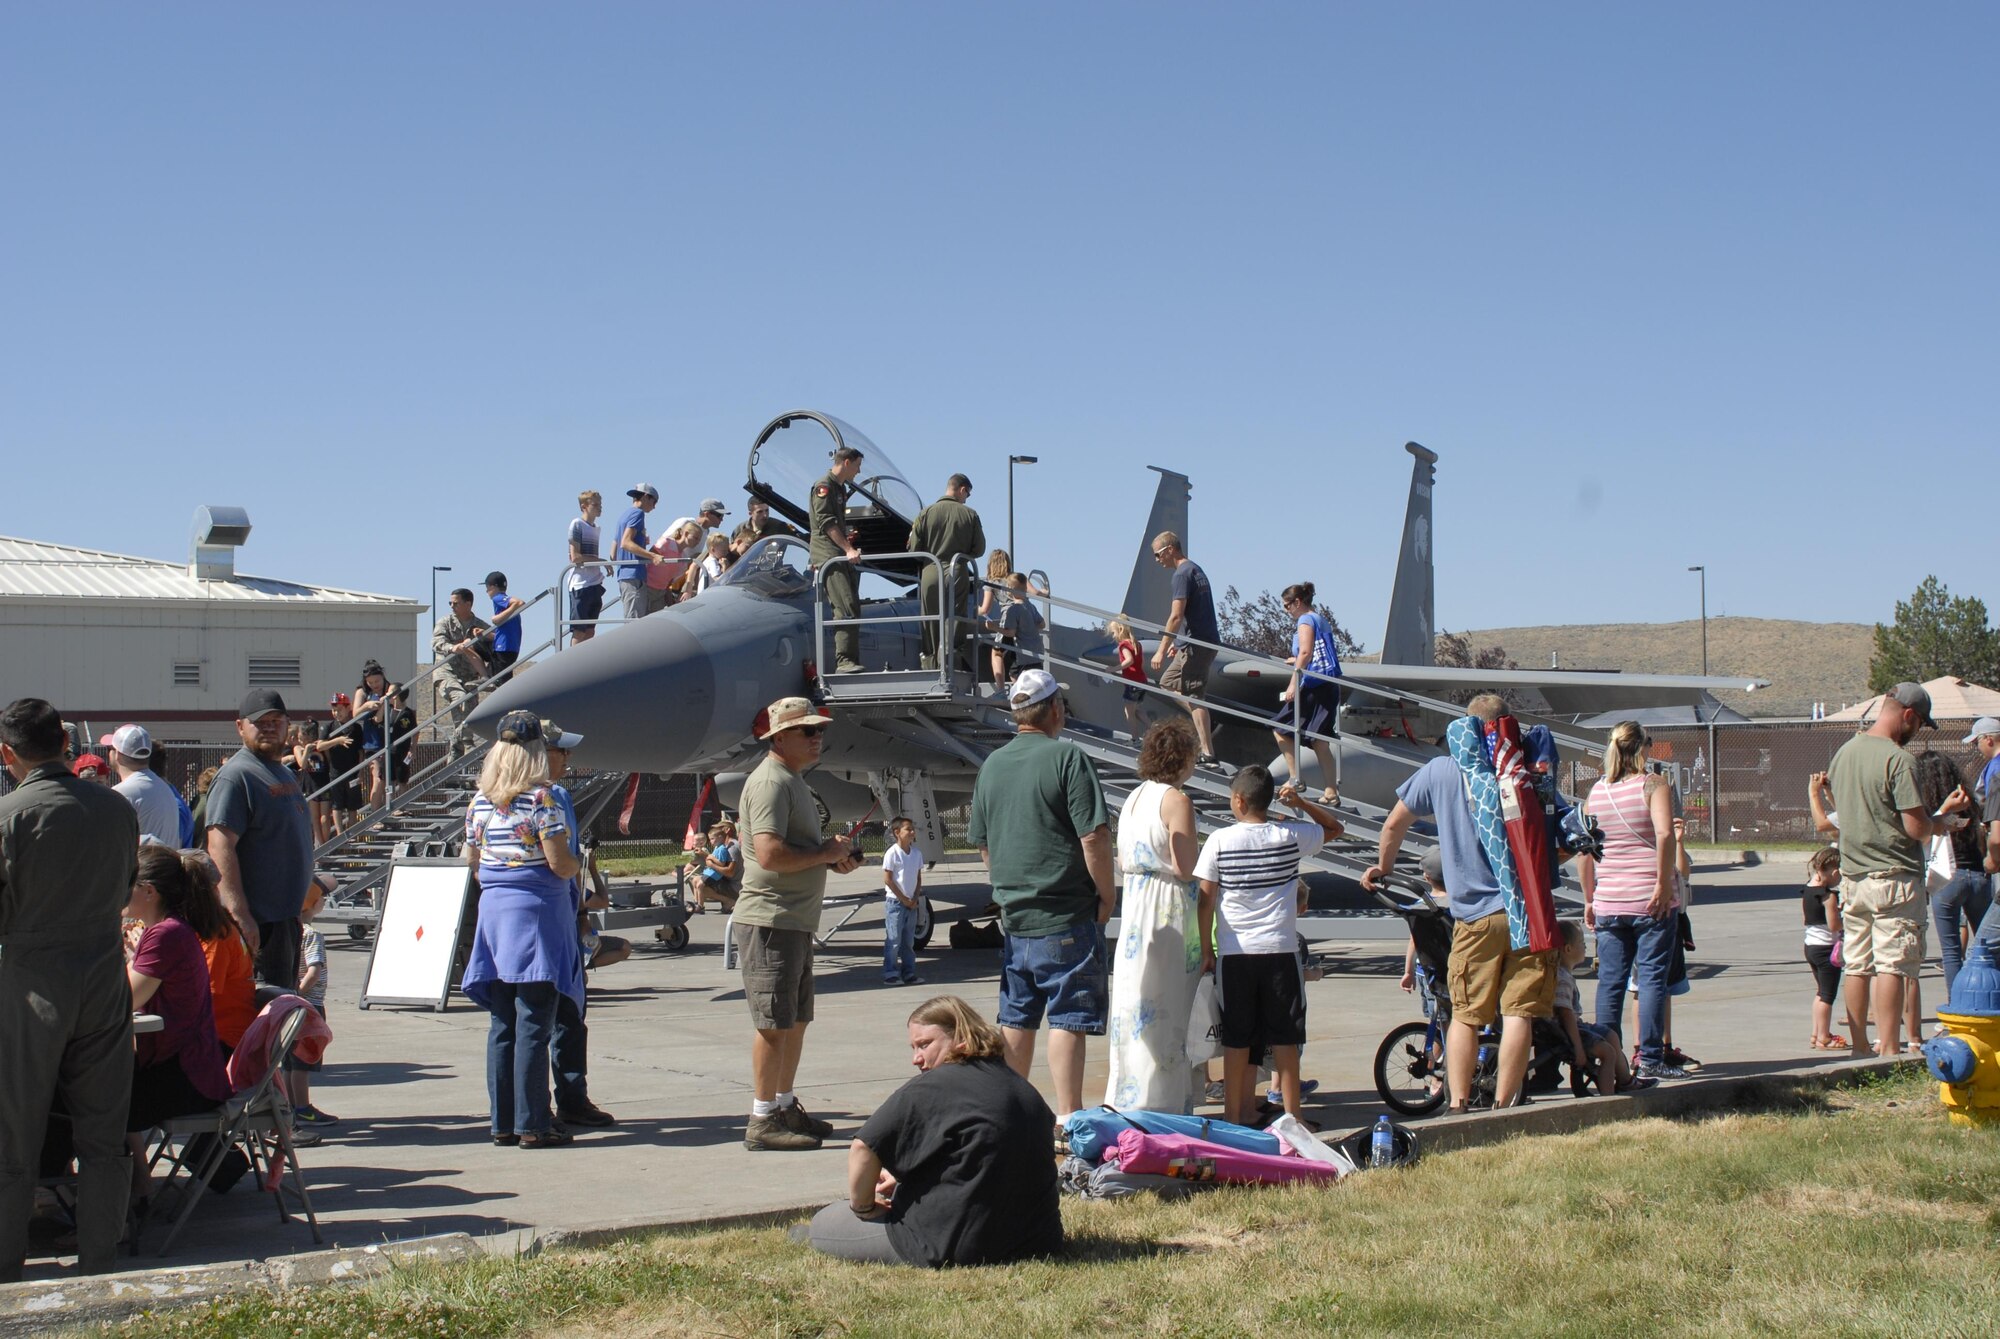 People crowd around a static display F-15 Eagle from the 173rd Fighter Wing during the Sentry Eagle Open House held July 22, 2017 at Kingsley Field in Klamath Falls, Oregon.  Sentry Eagle is a four day large force exercise that brings together different aircraft and units from around the country for dissimilar air combat training.  Additionally, the wing opens its gates to the public for a day during their biennial open house.  (U.S. Air National Guard photo by Master Sgt. Jennifer Shirar)